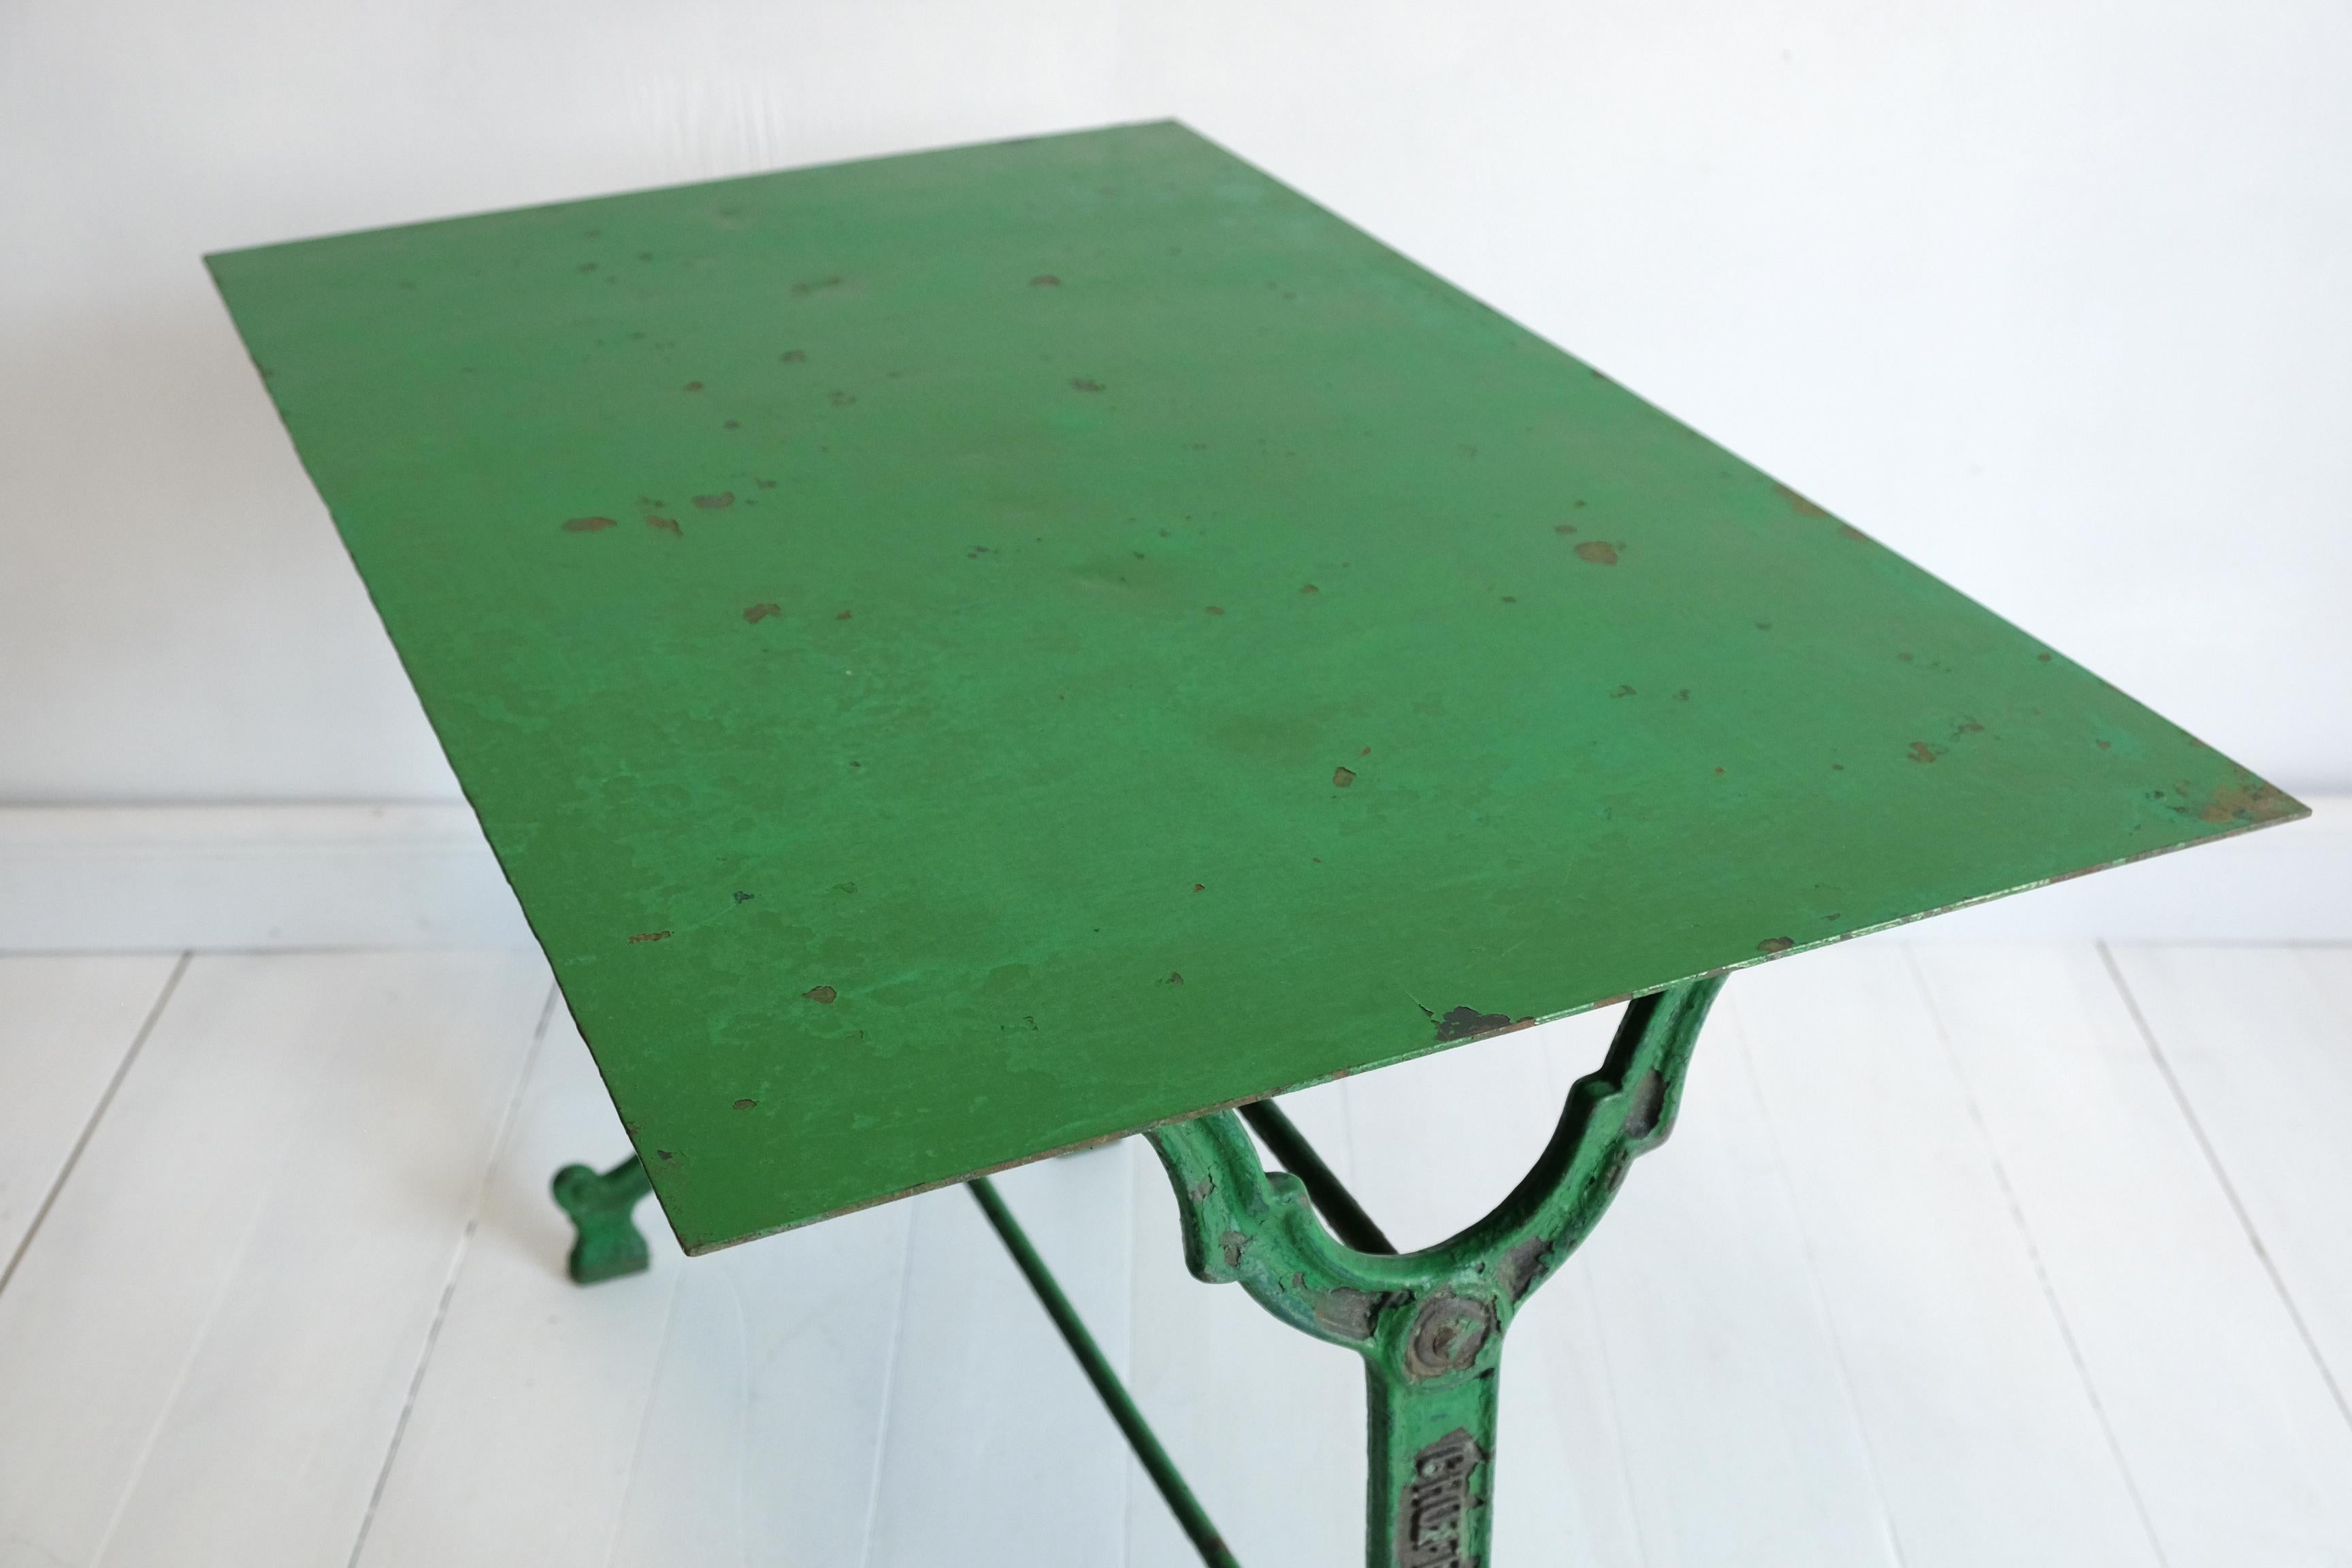 Industrial French Cast Iron Garden Table, Green, 19th Century, Bistro, Outdoor, Ornate